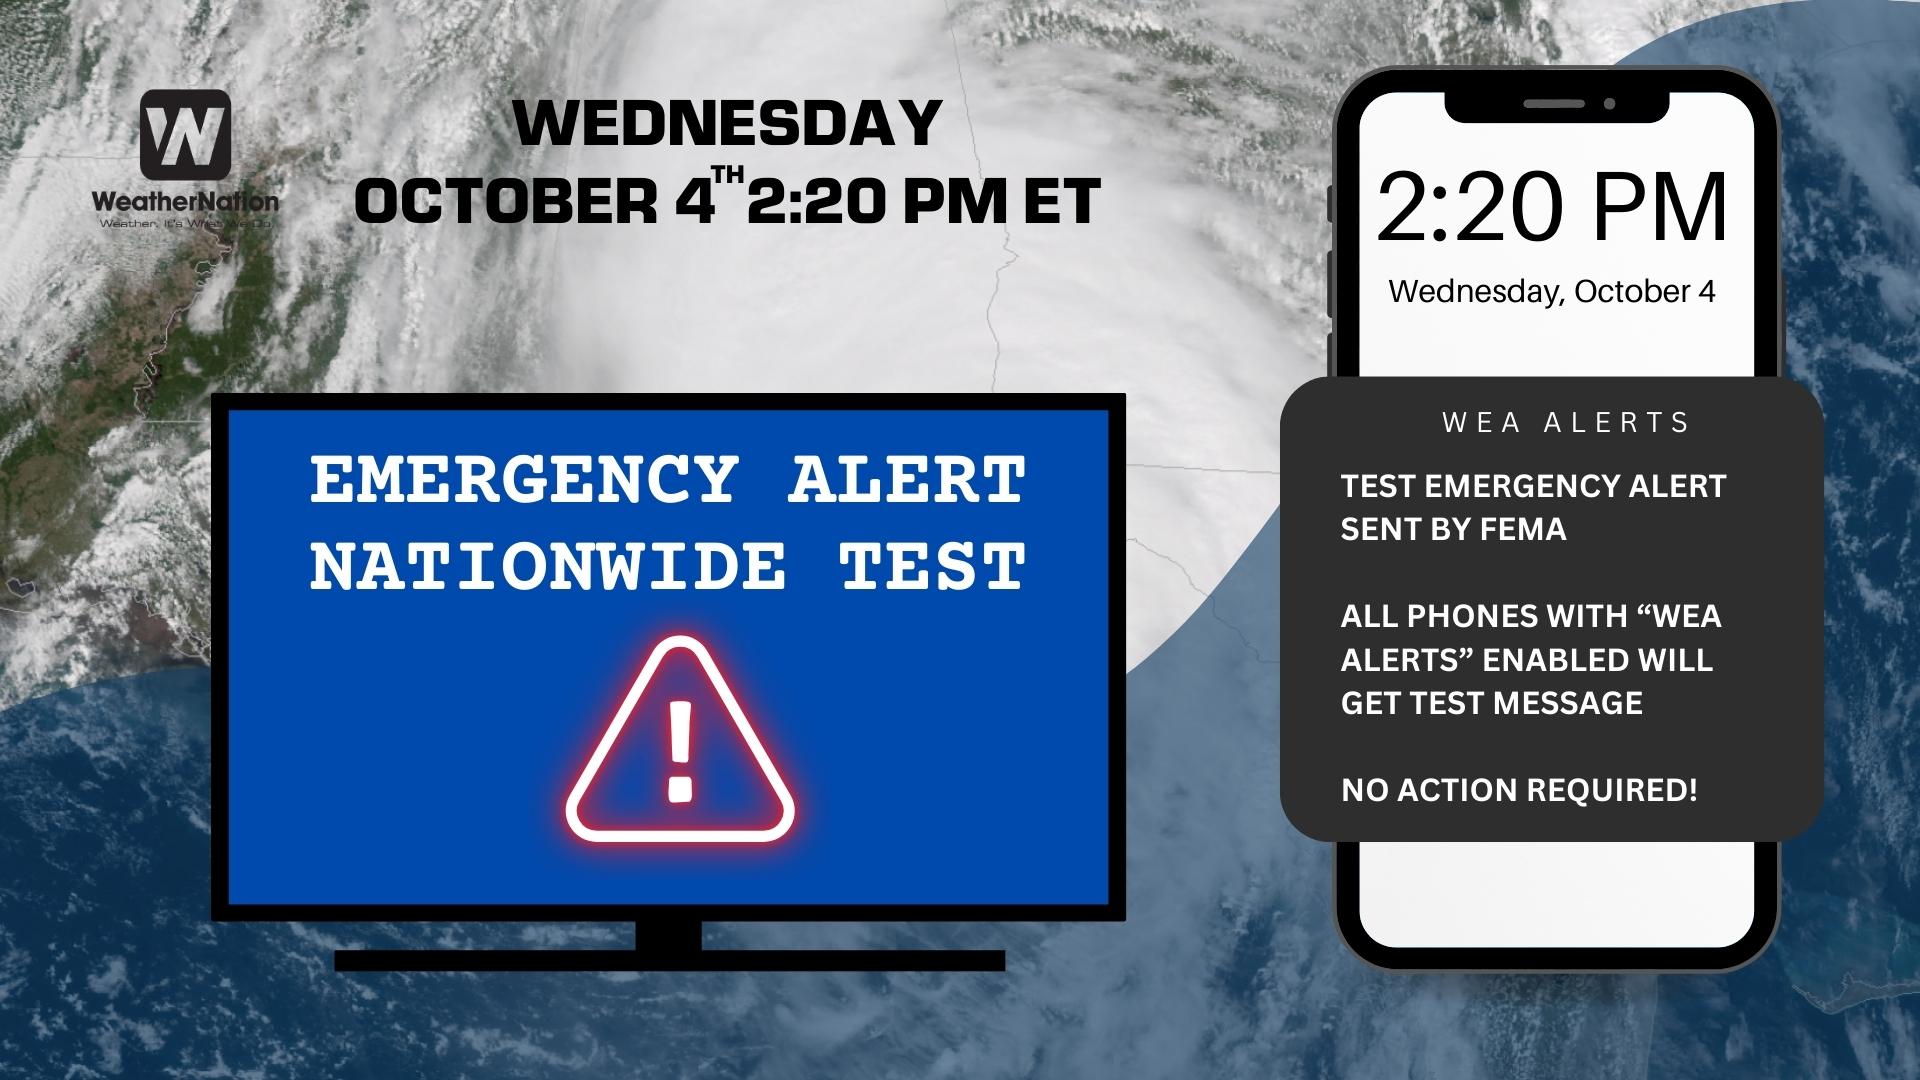 Happening Today Nationwide Test of the Emergency Alert System